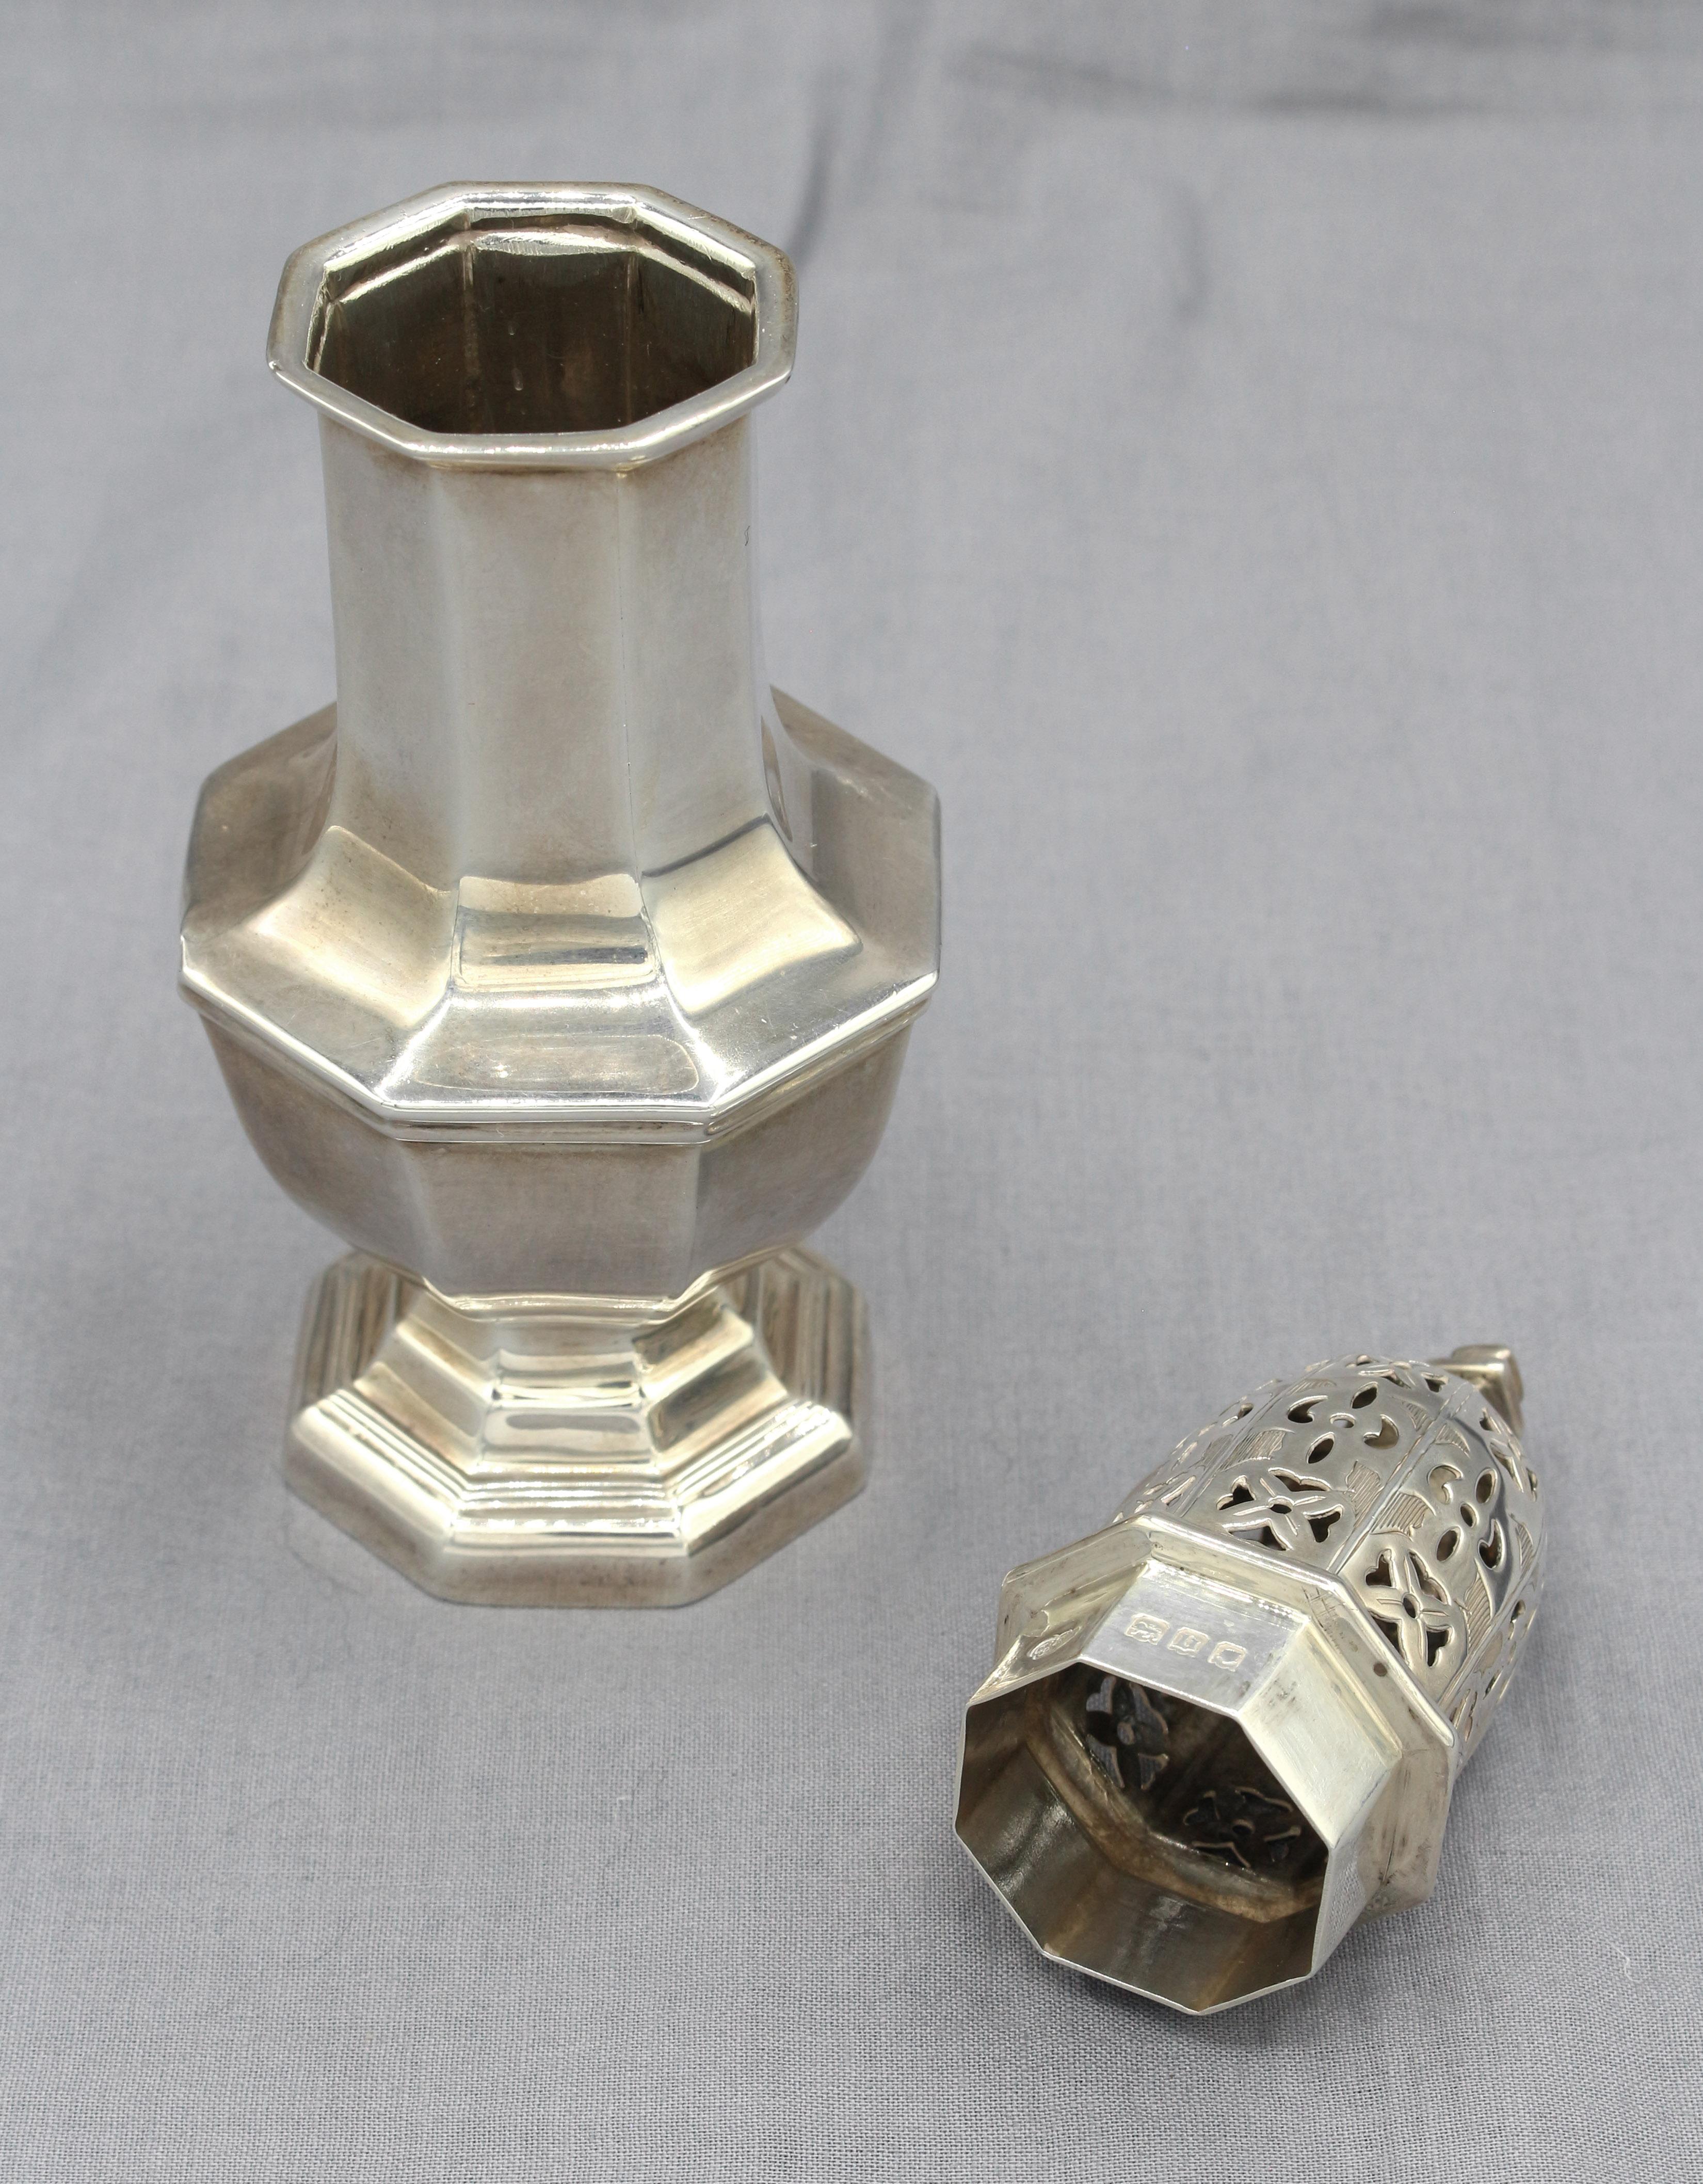 Neoclassical 1917 Sterling Silver Sugar Caster by Goldsmiths & Silversmiths of London For Sale